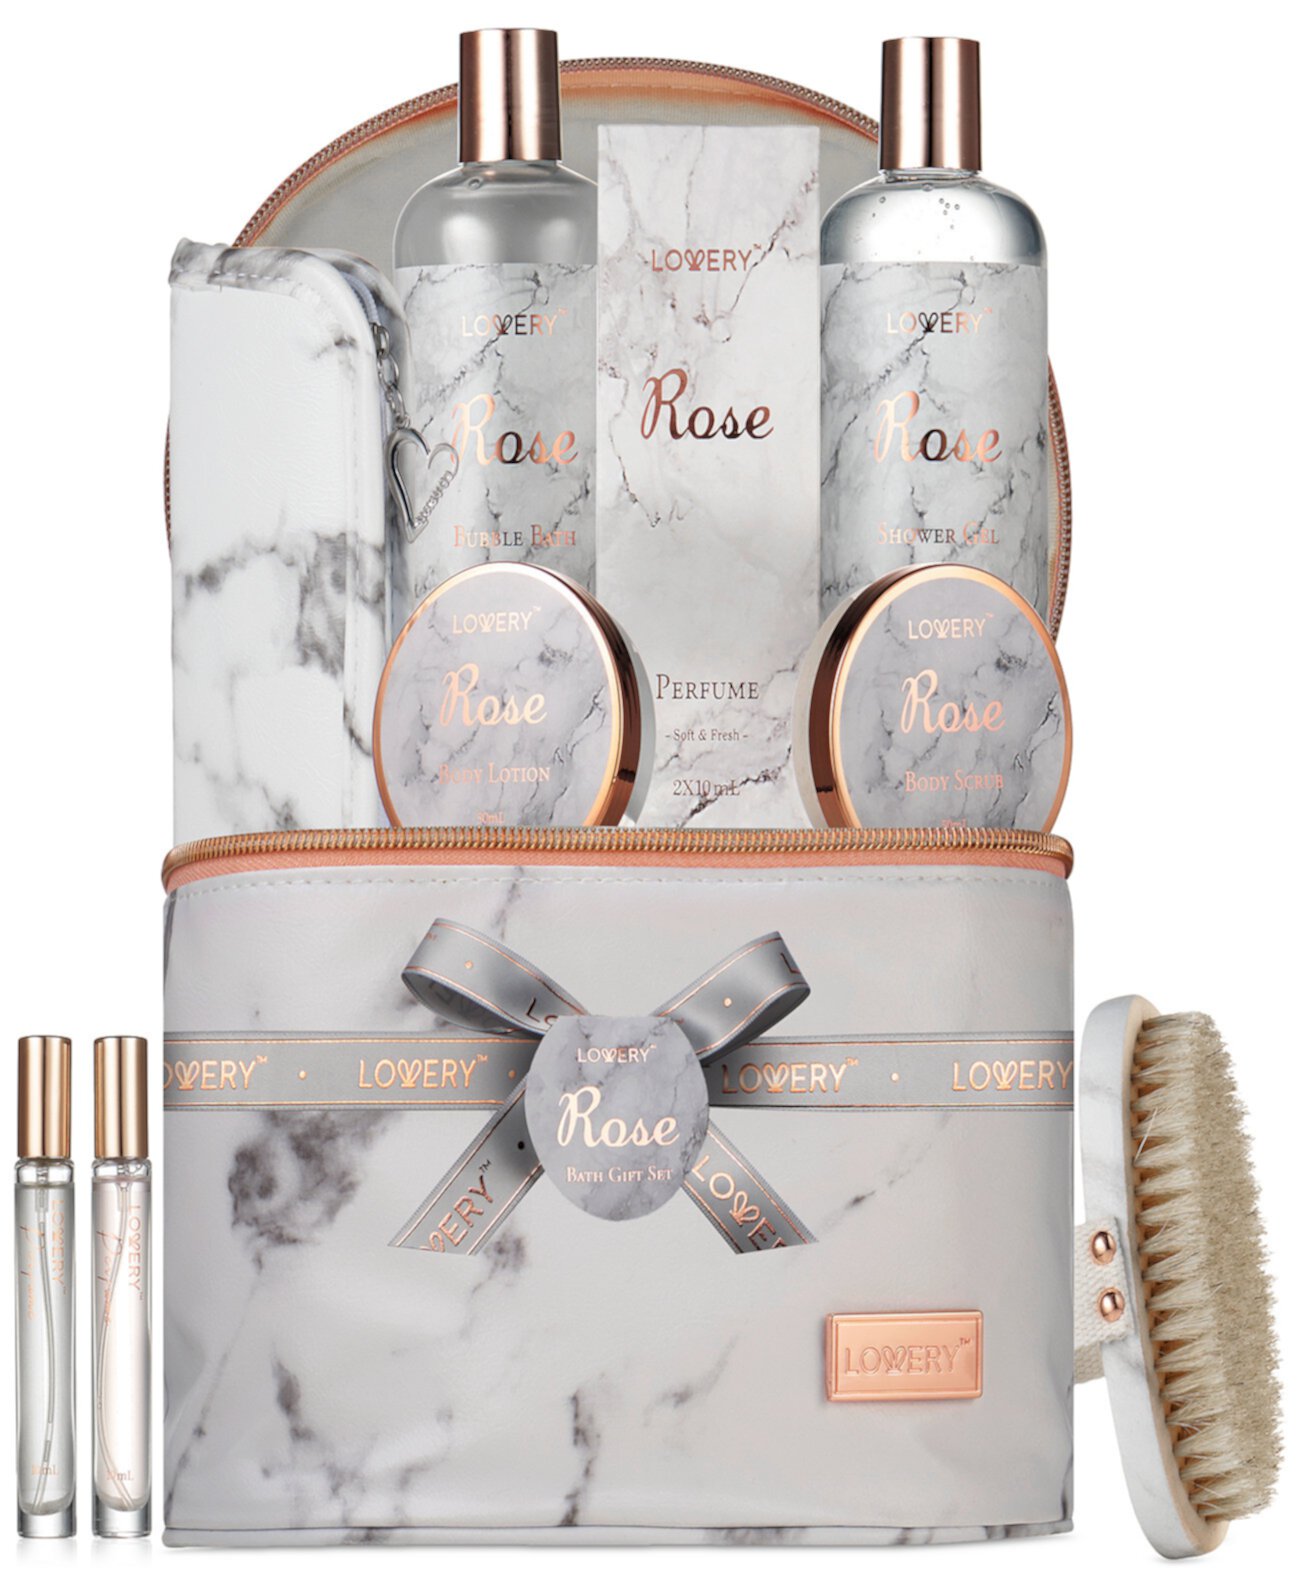 15-Pc. Rose Home Spa Luxury Body Care Gift Set Lovery